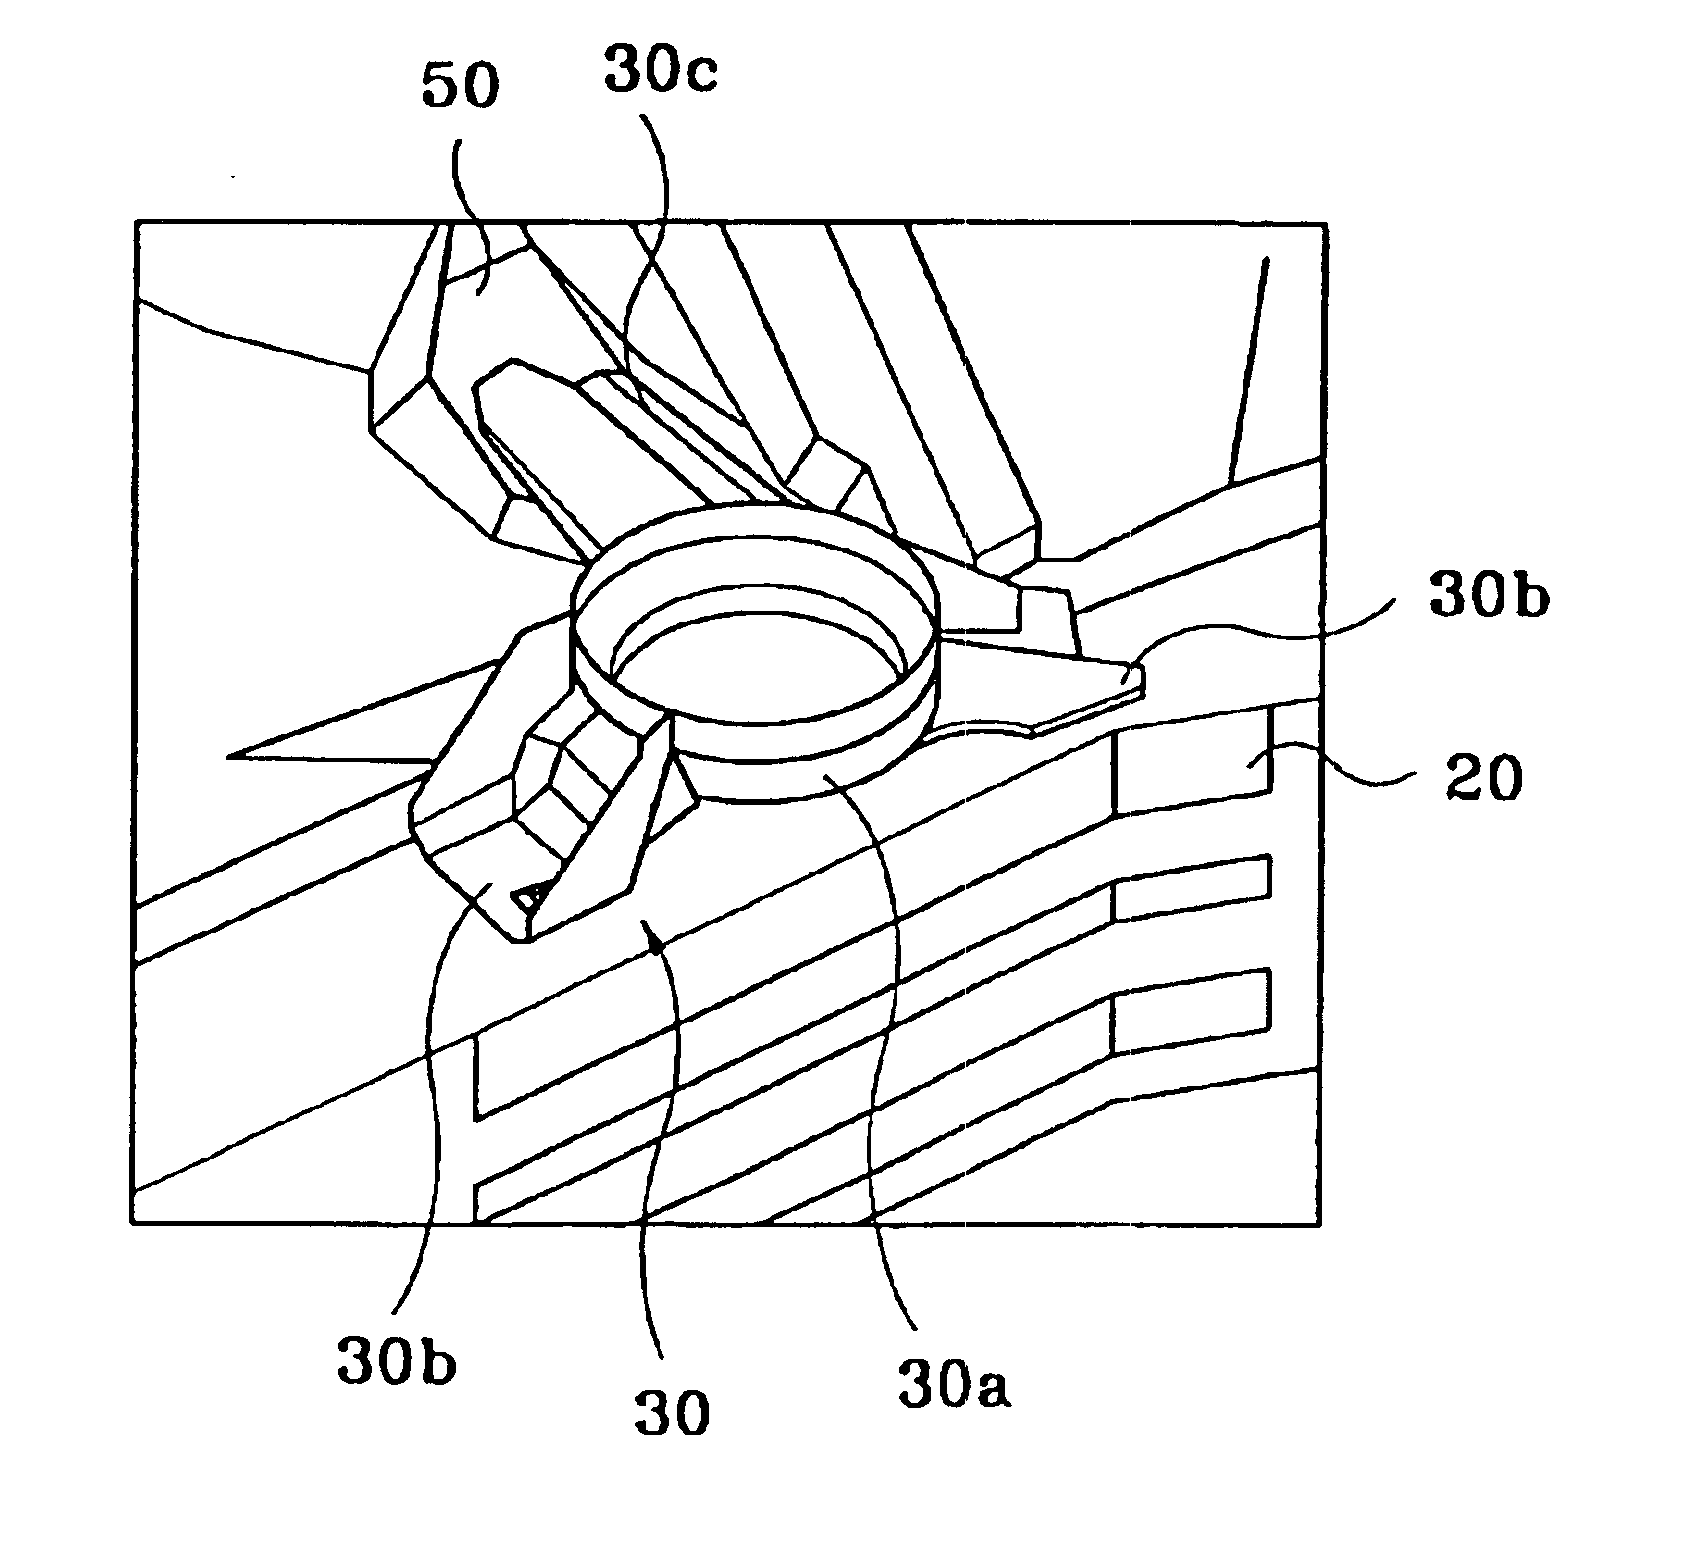 Engine mounting structure